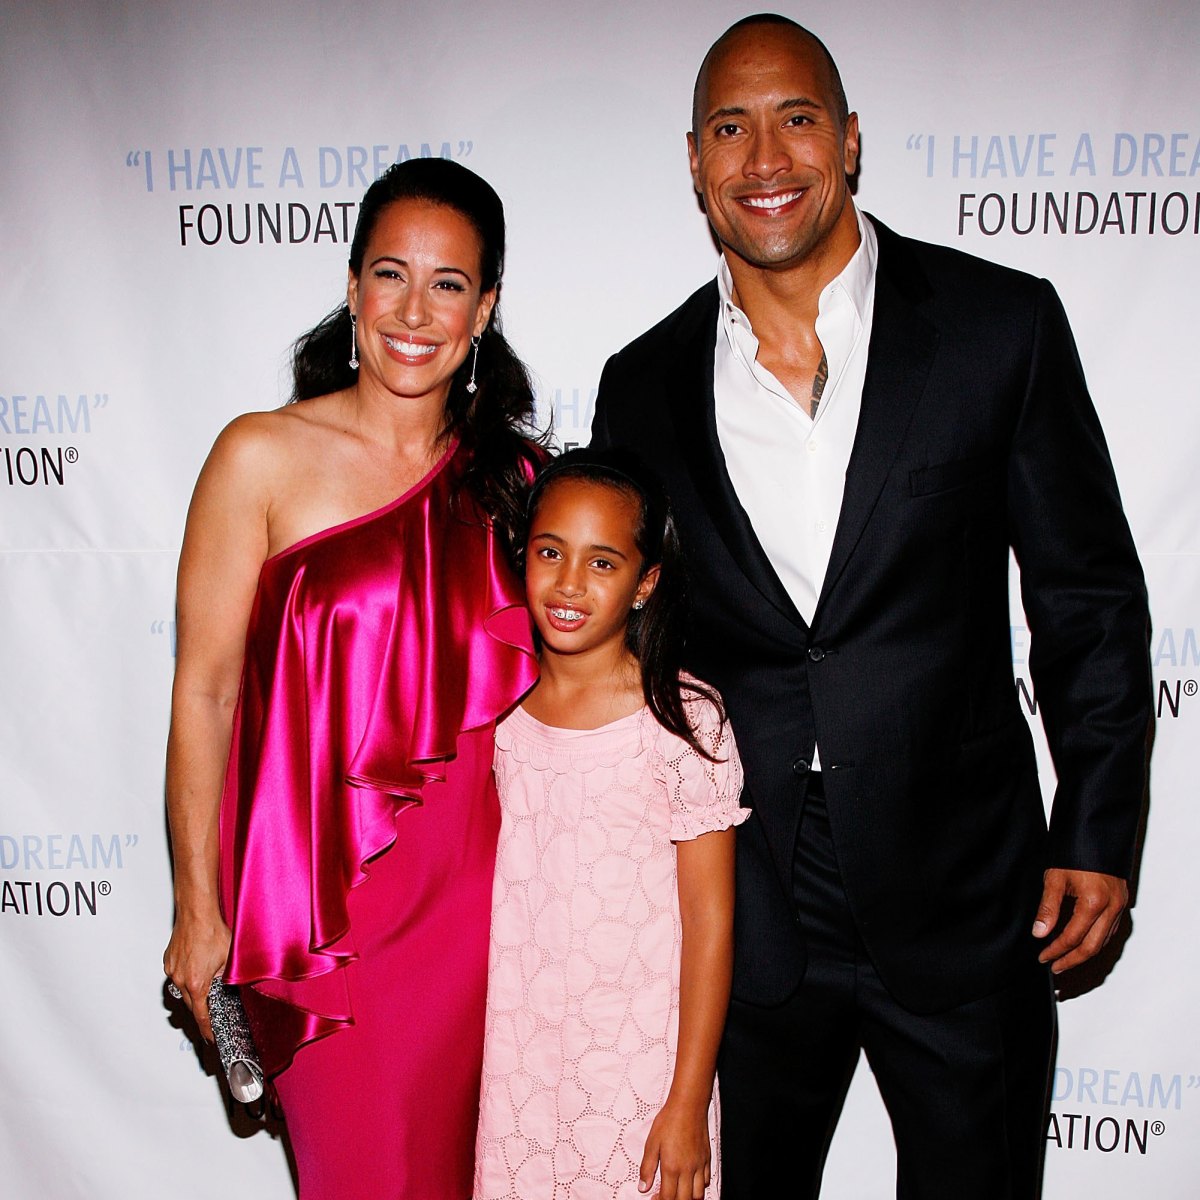 bao the rock surprised everyone when he gave his daughter a mclaren spider s when she debuted in the wrestling industry when she just turned years old 6521835490794 The Rock Surprised Everyone When He Gave His Daughter A Mclaren Spider 720s When She Debuted In The Wrestling Industry When She Just Turned 19 Years Old.